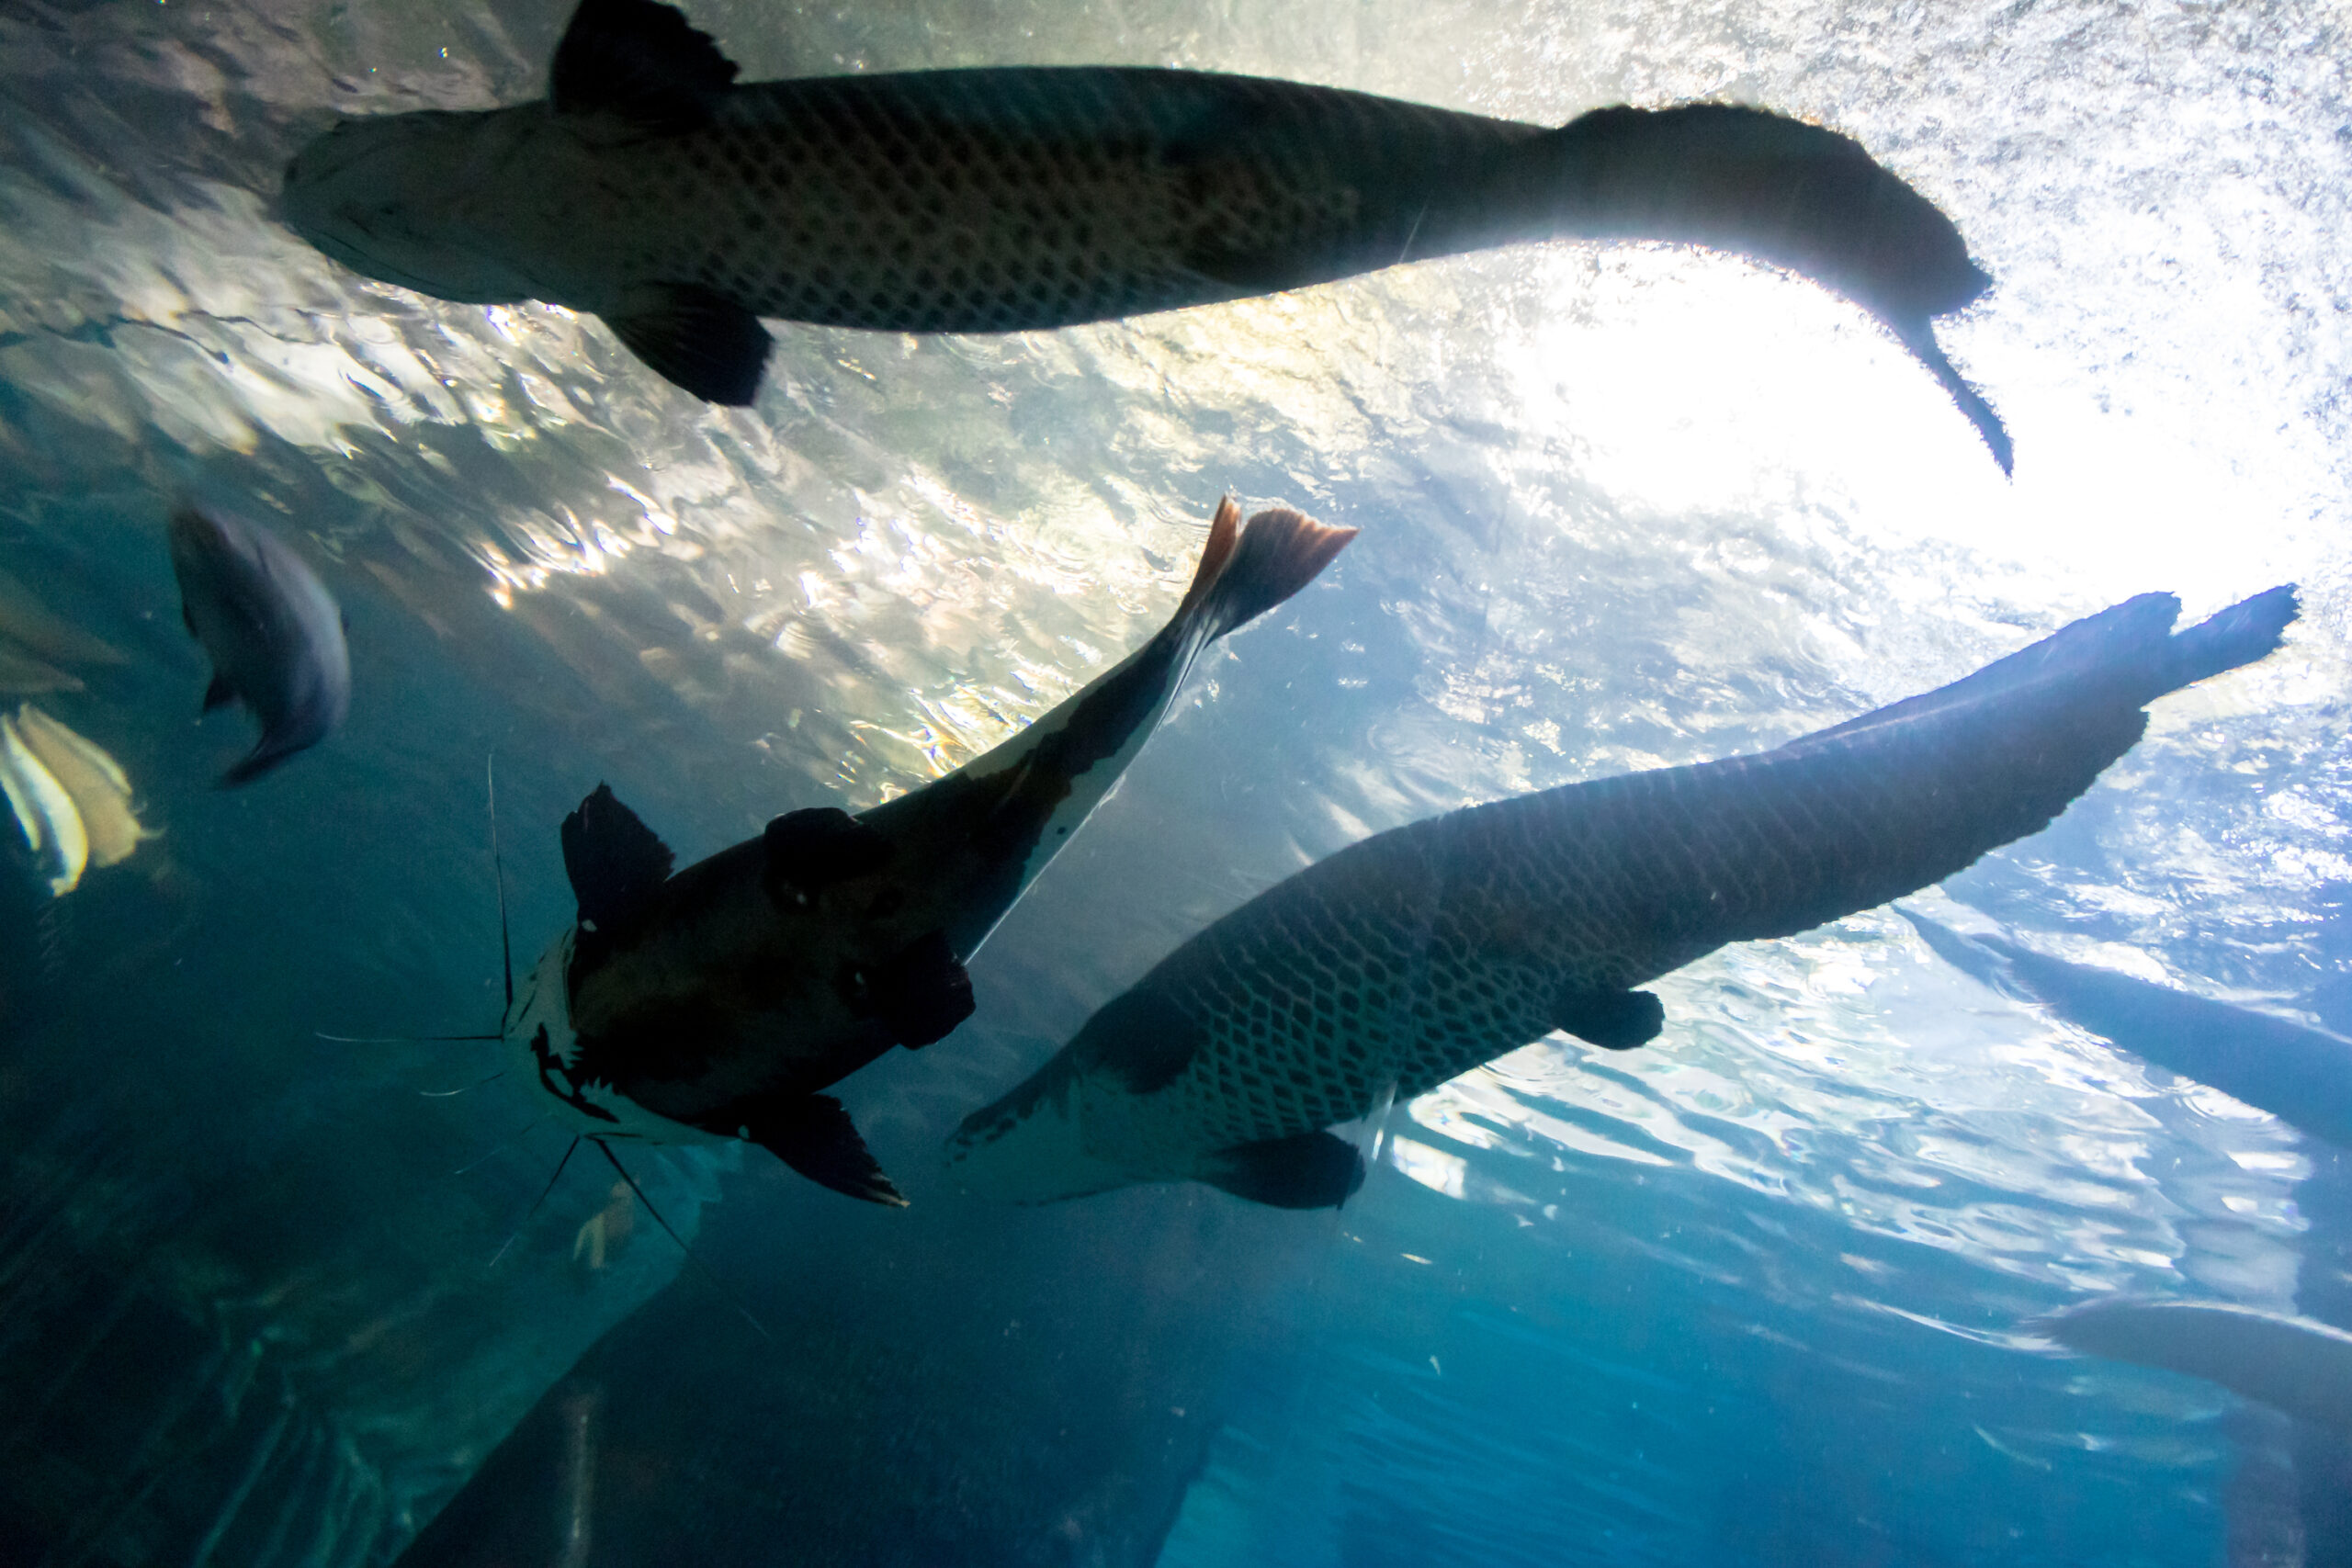 A close-up image of a tarpon, one of the targeted species for backwater fishing in Puerto Rico